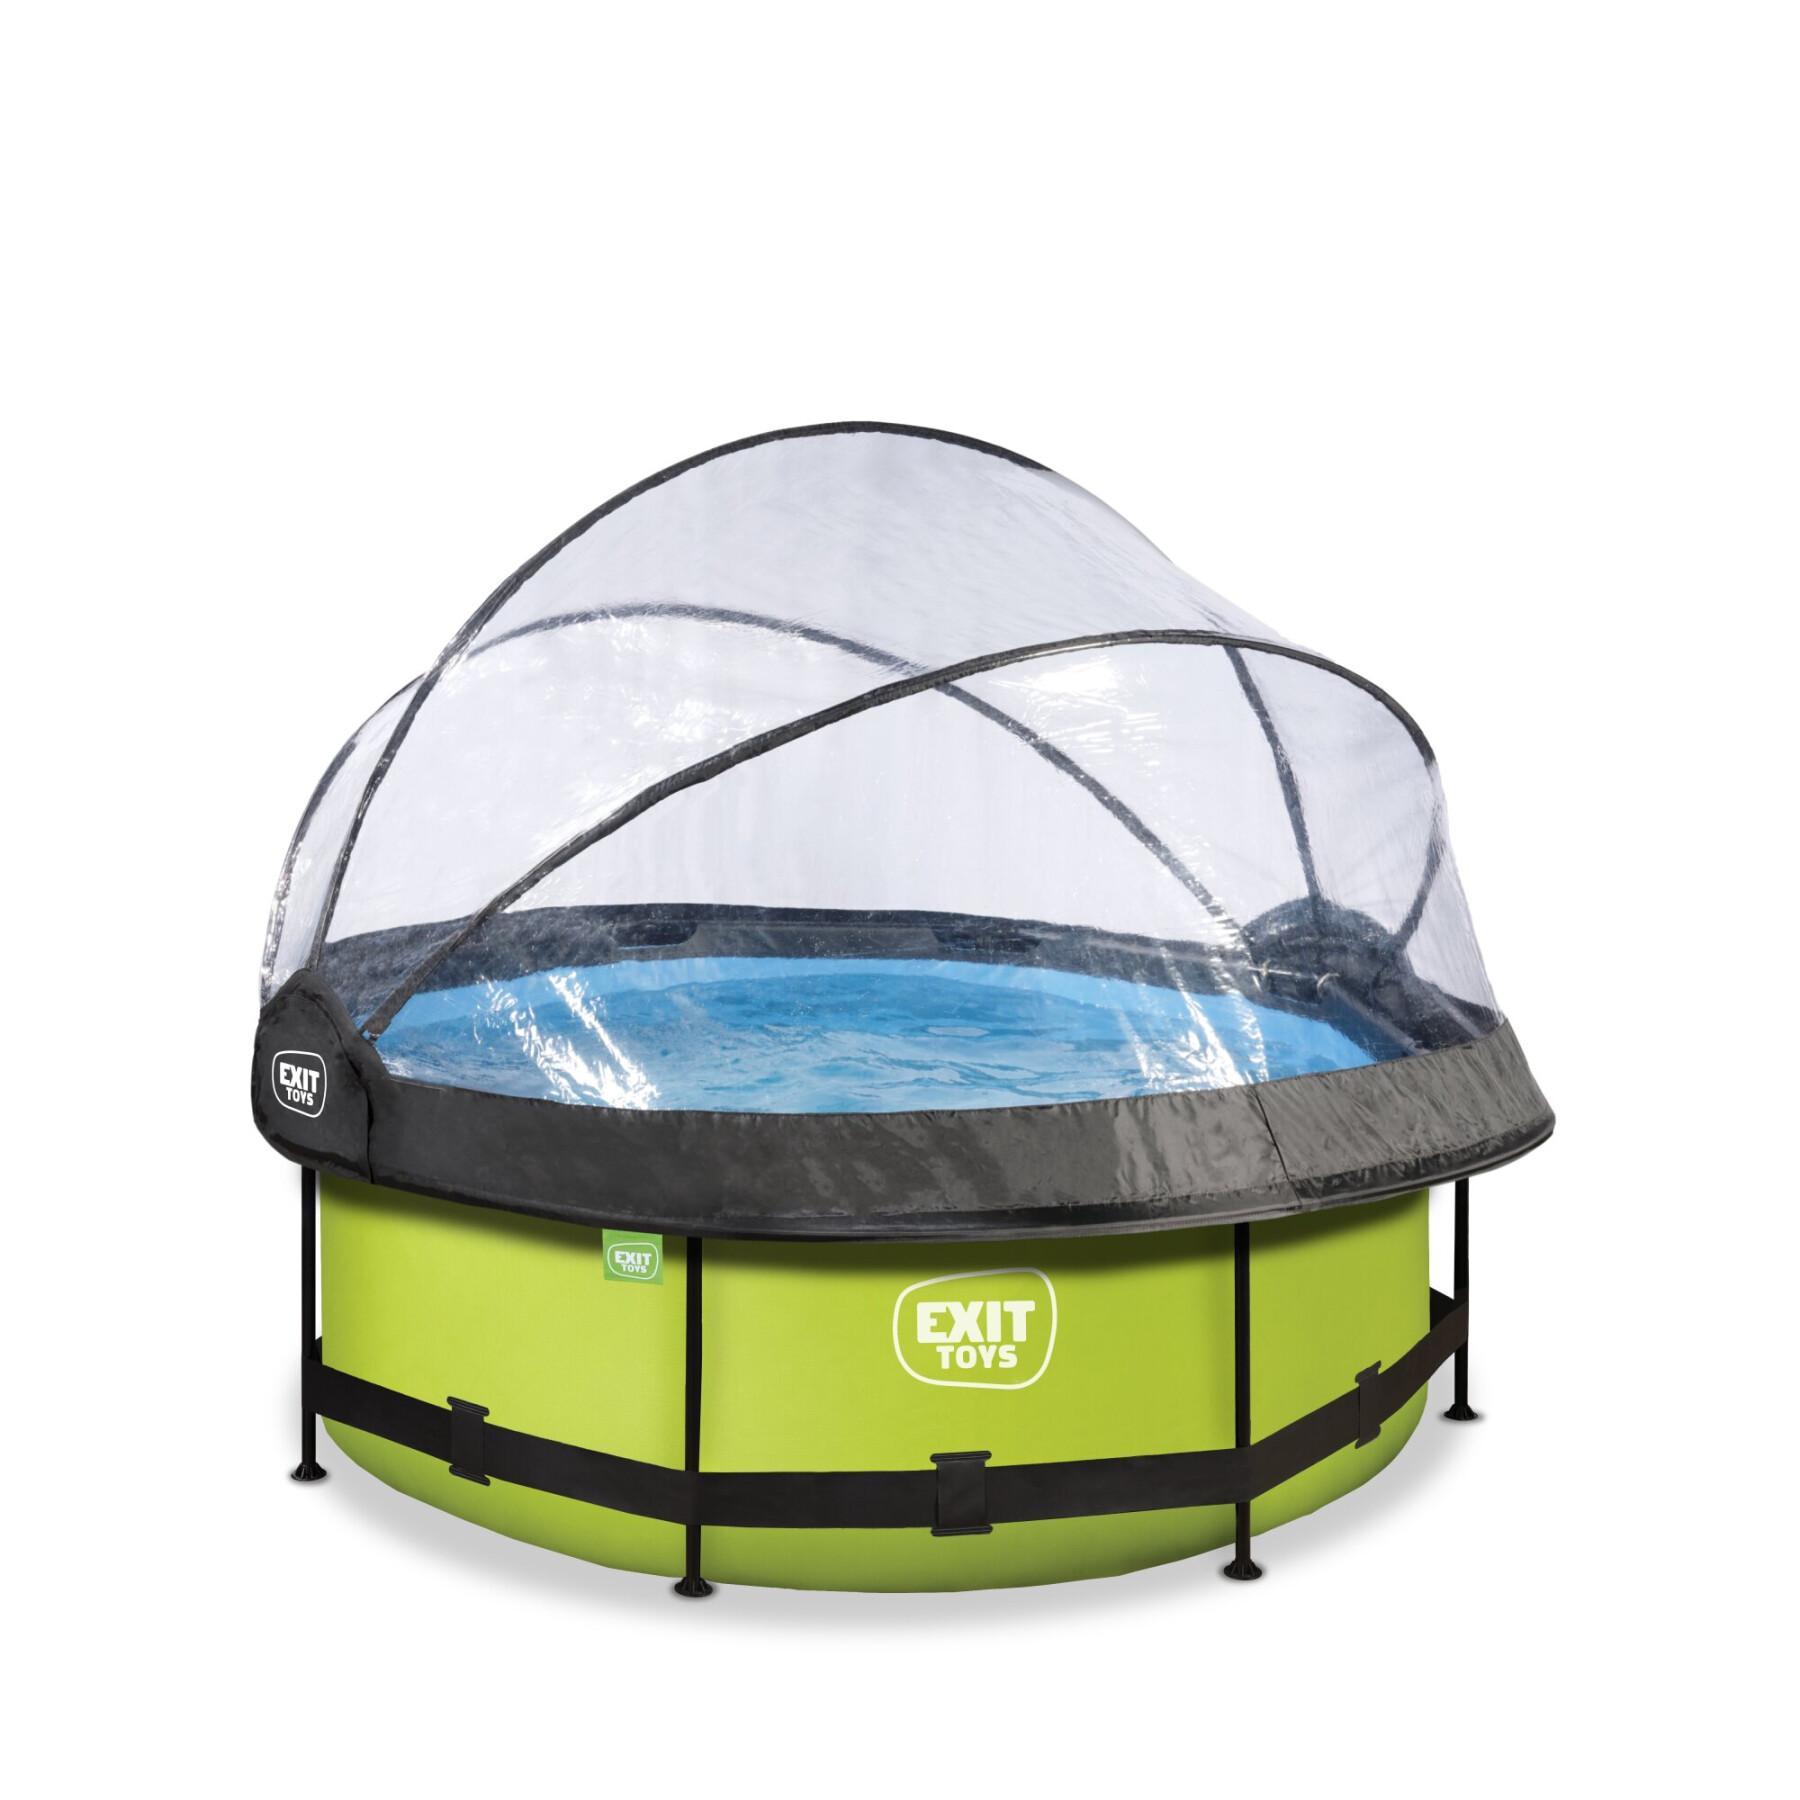 Swimming pool with filter pump and children's dome Exit Toys Lime 244 x 76 cm